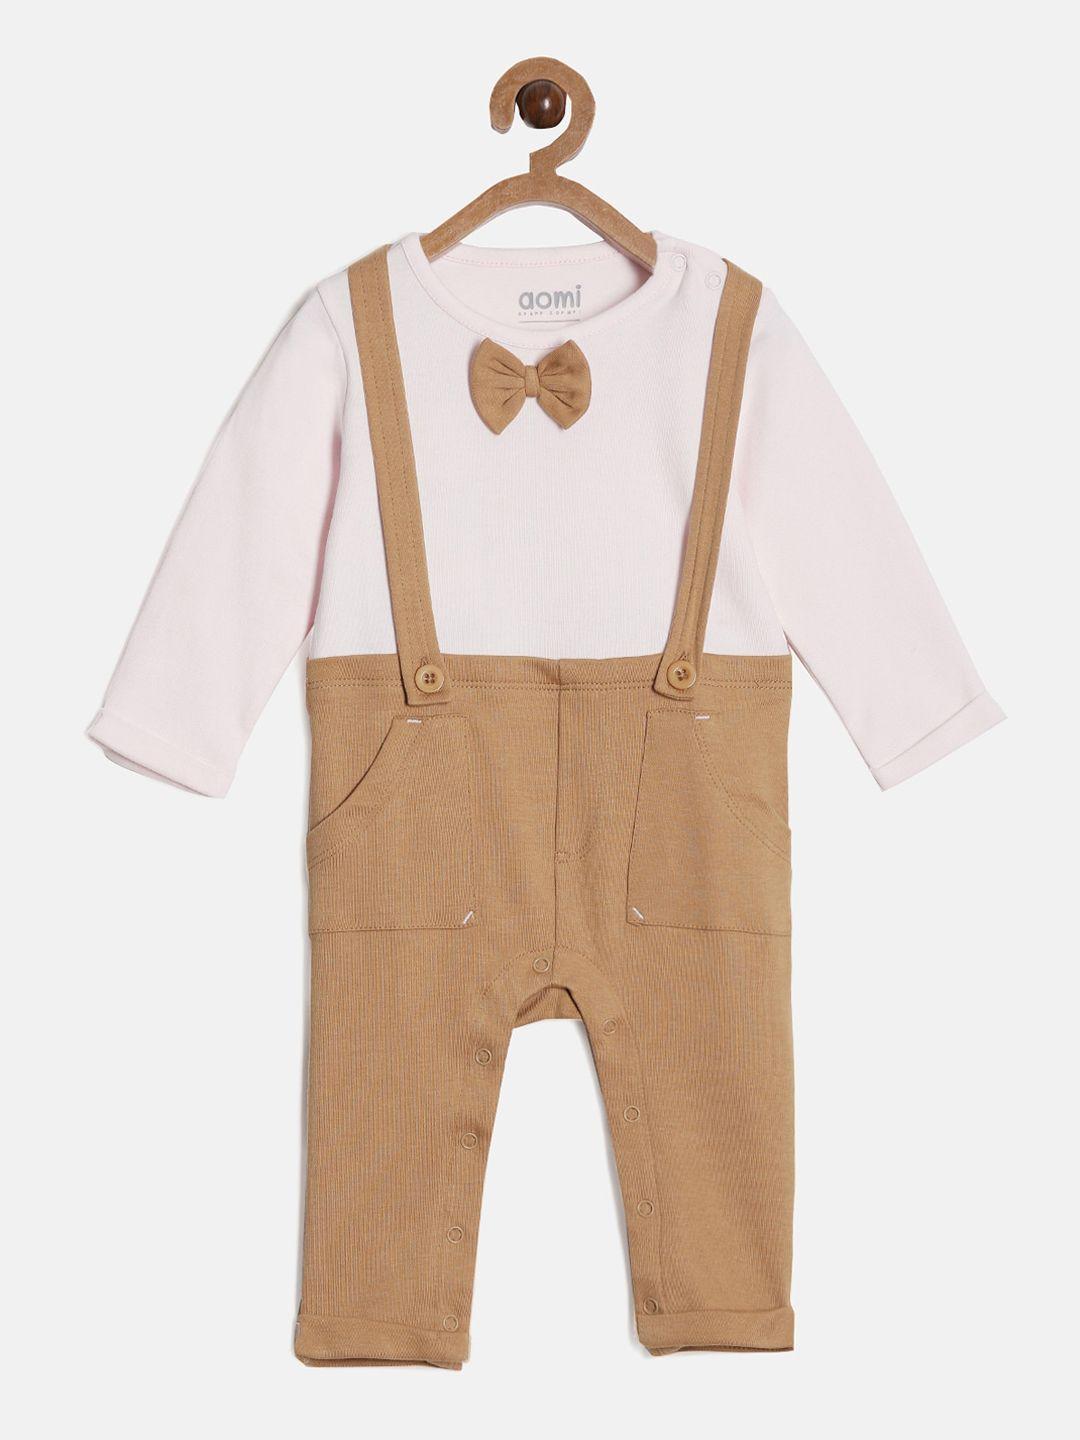 aomi solid cotton rompers with bowtie